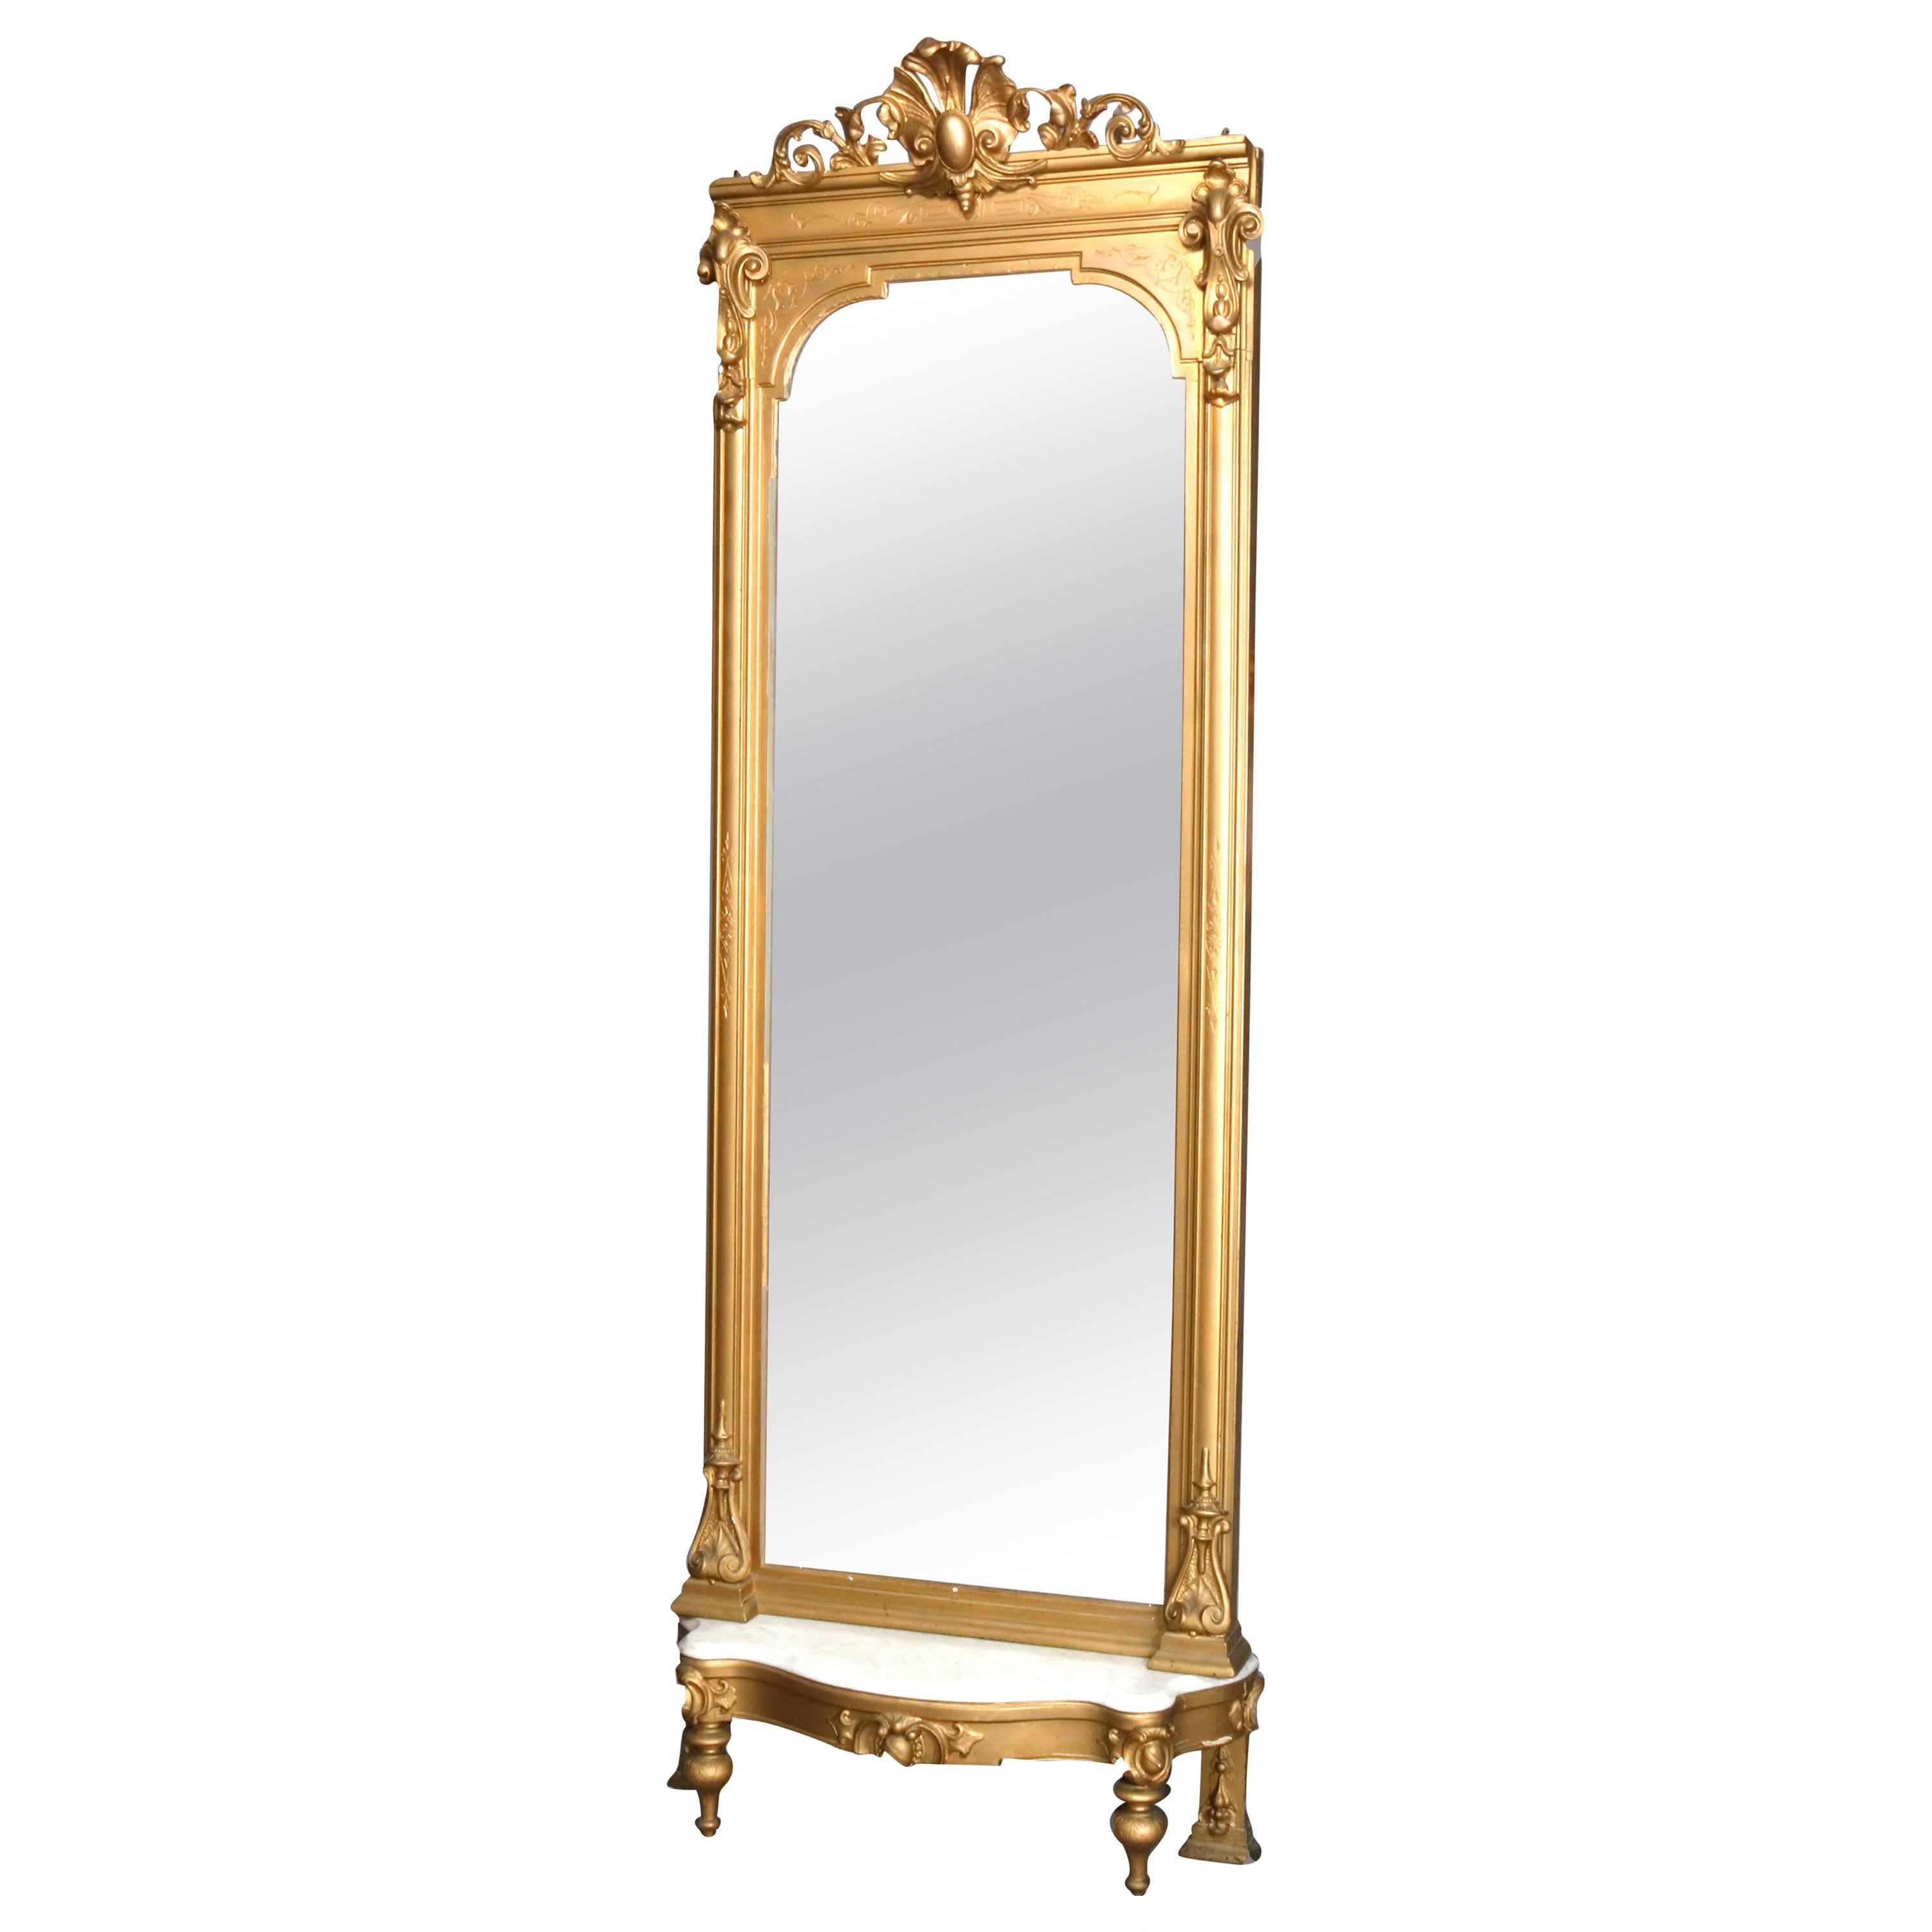 Antique French Giltwood and Marble Pier Mirror, 19th Century